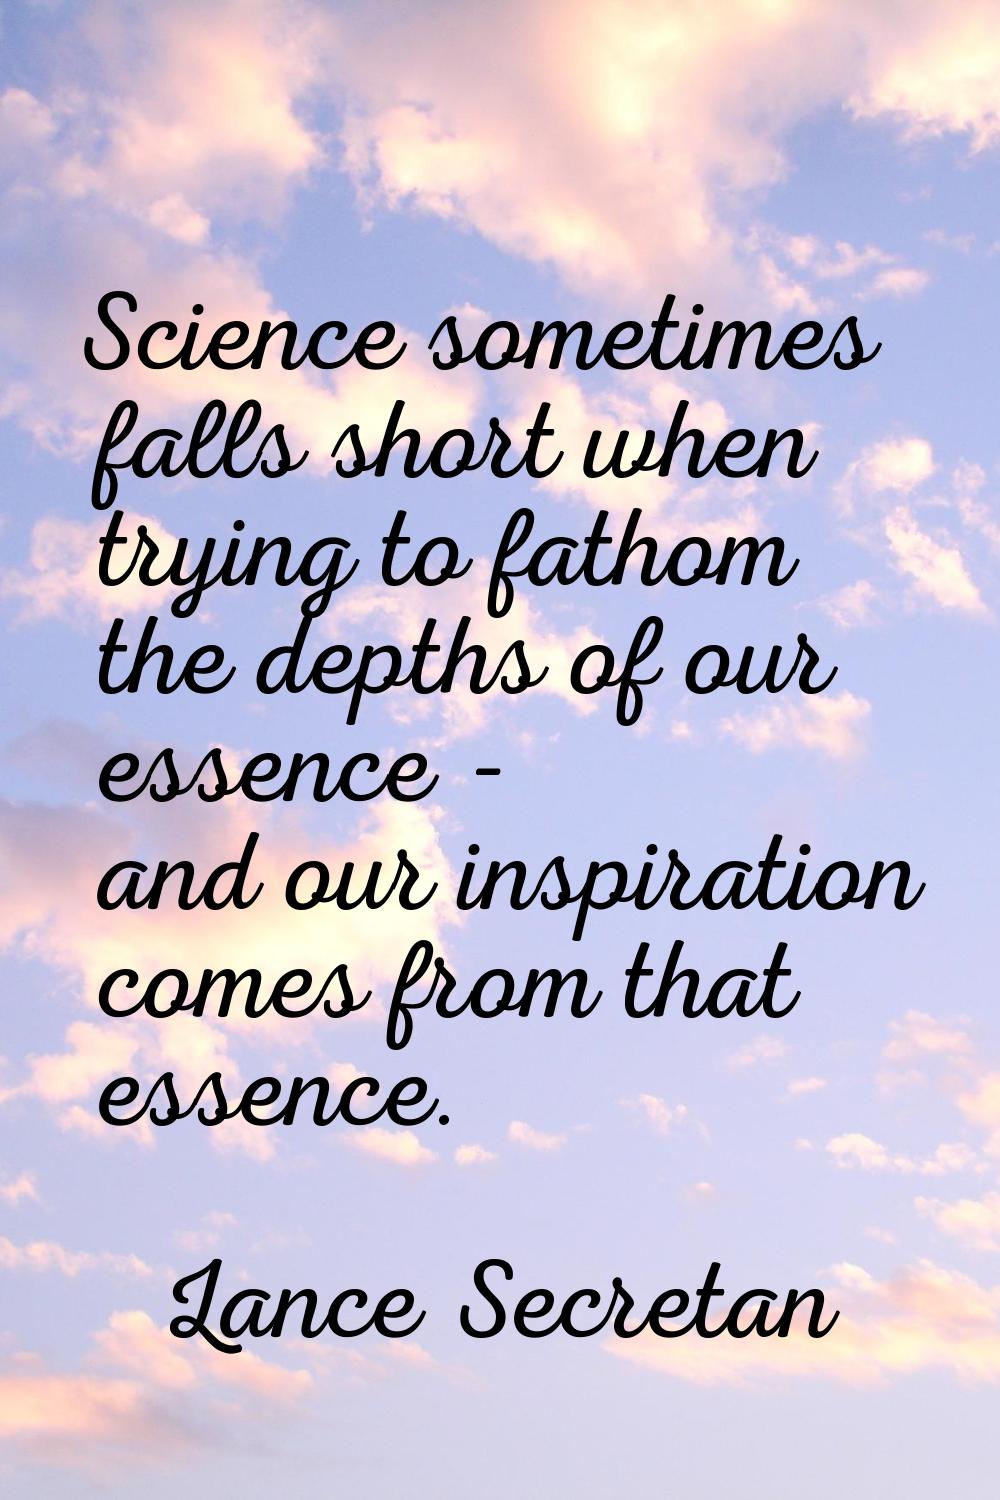 Science sometimes falls short when trying to fathom the depths of our essence - and our inspiration